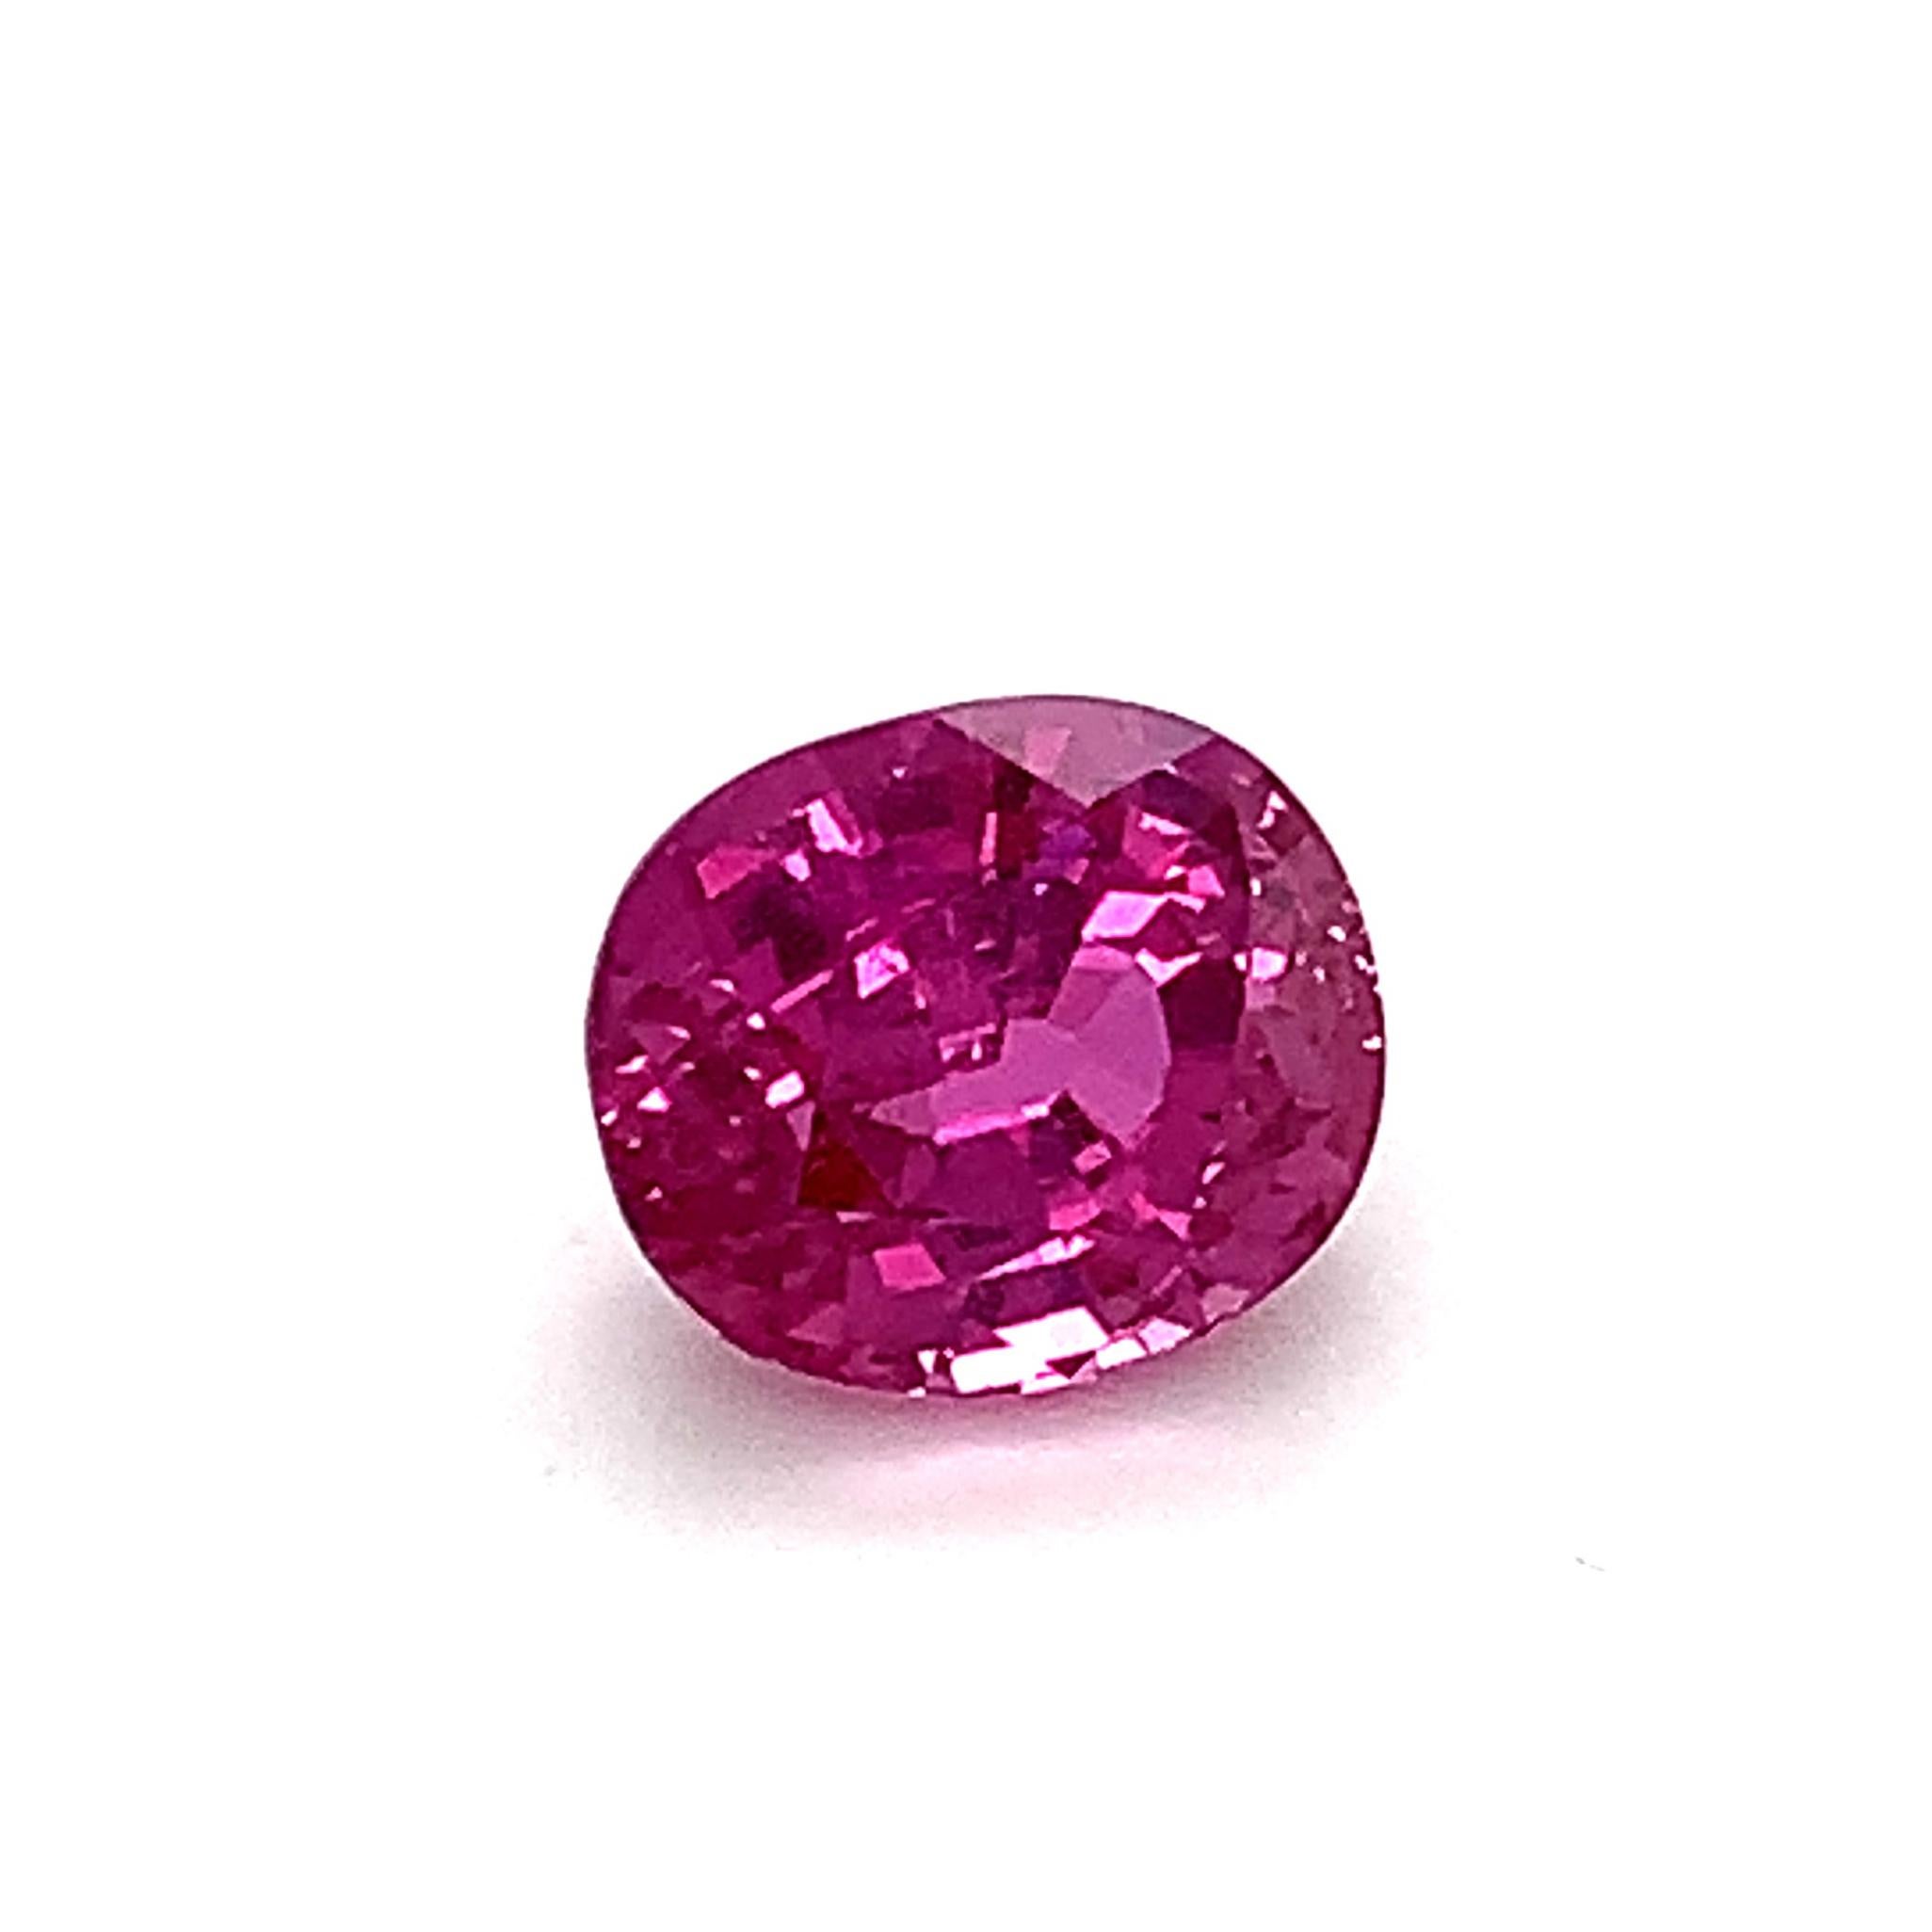 5.00 Carat Purple Pink Sapphire Oval, Unset Loose Gemstone, GIA Certified 2